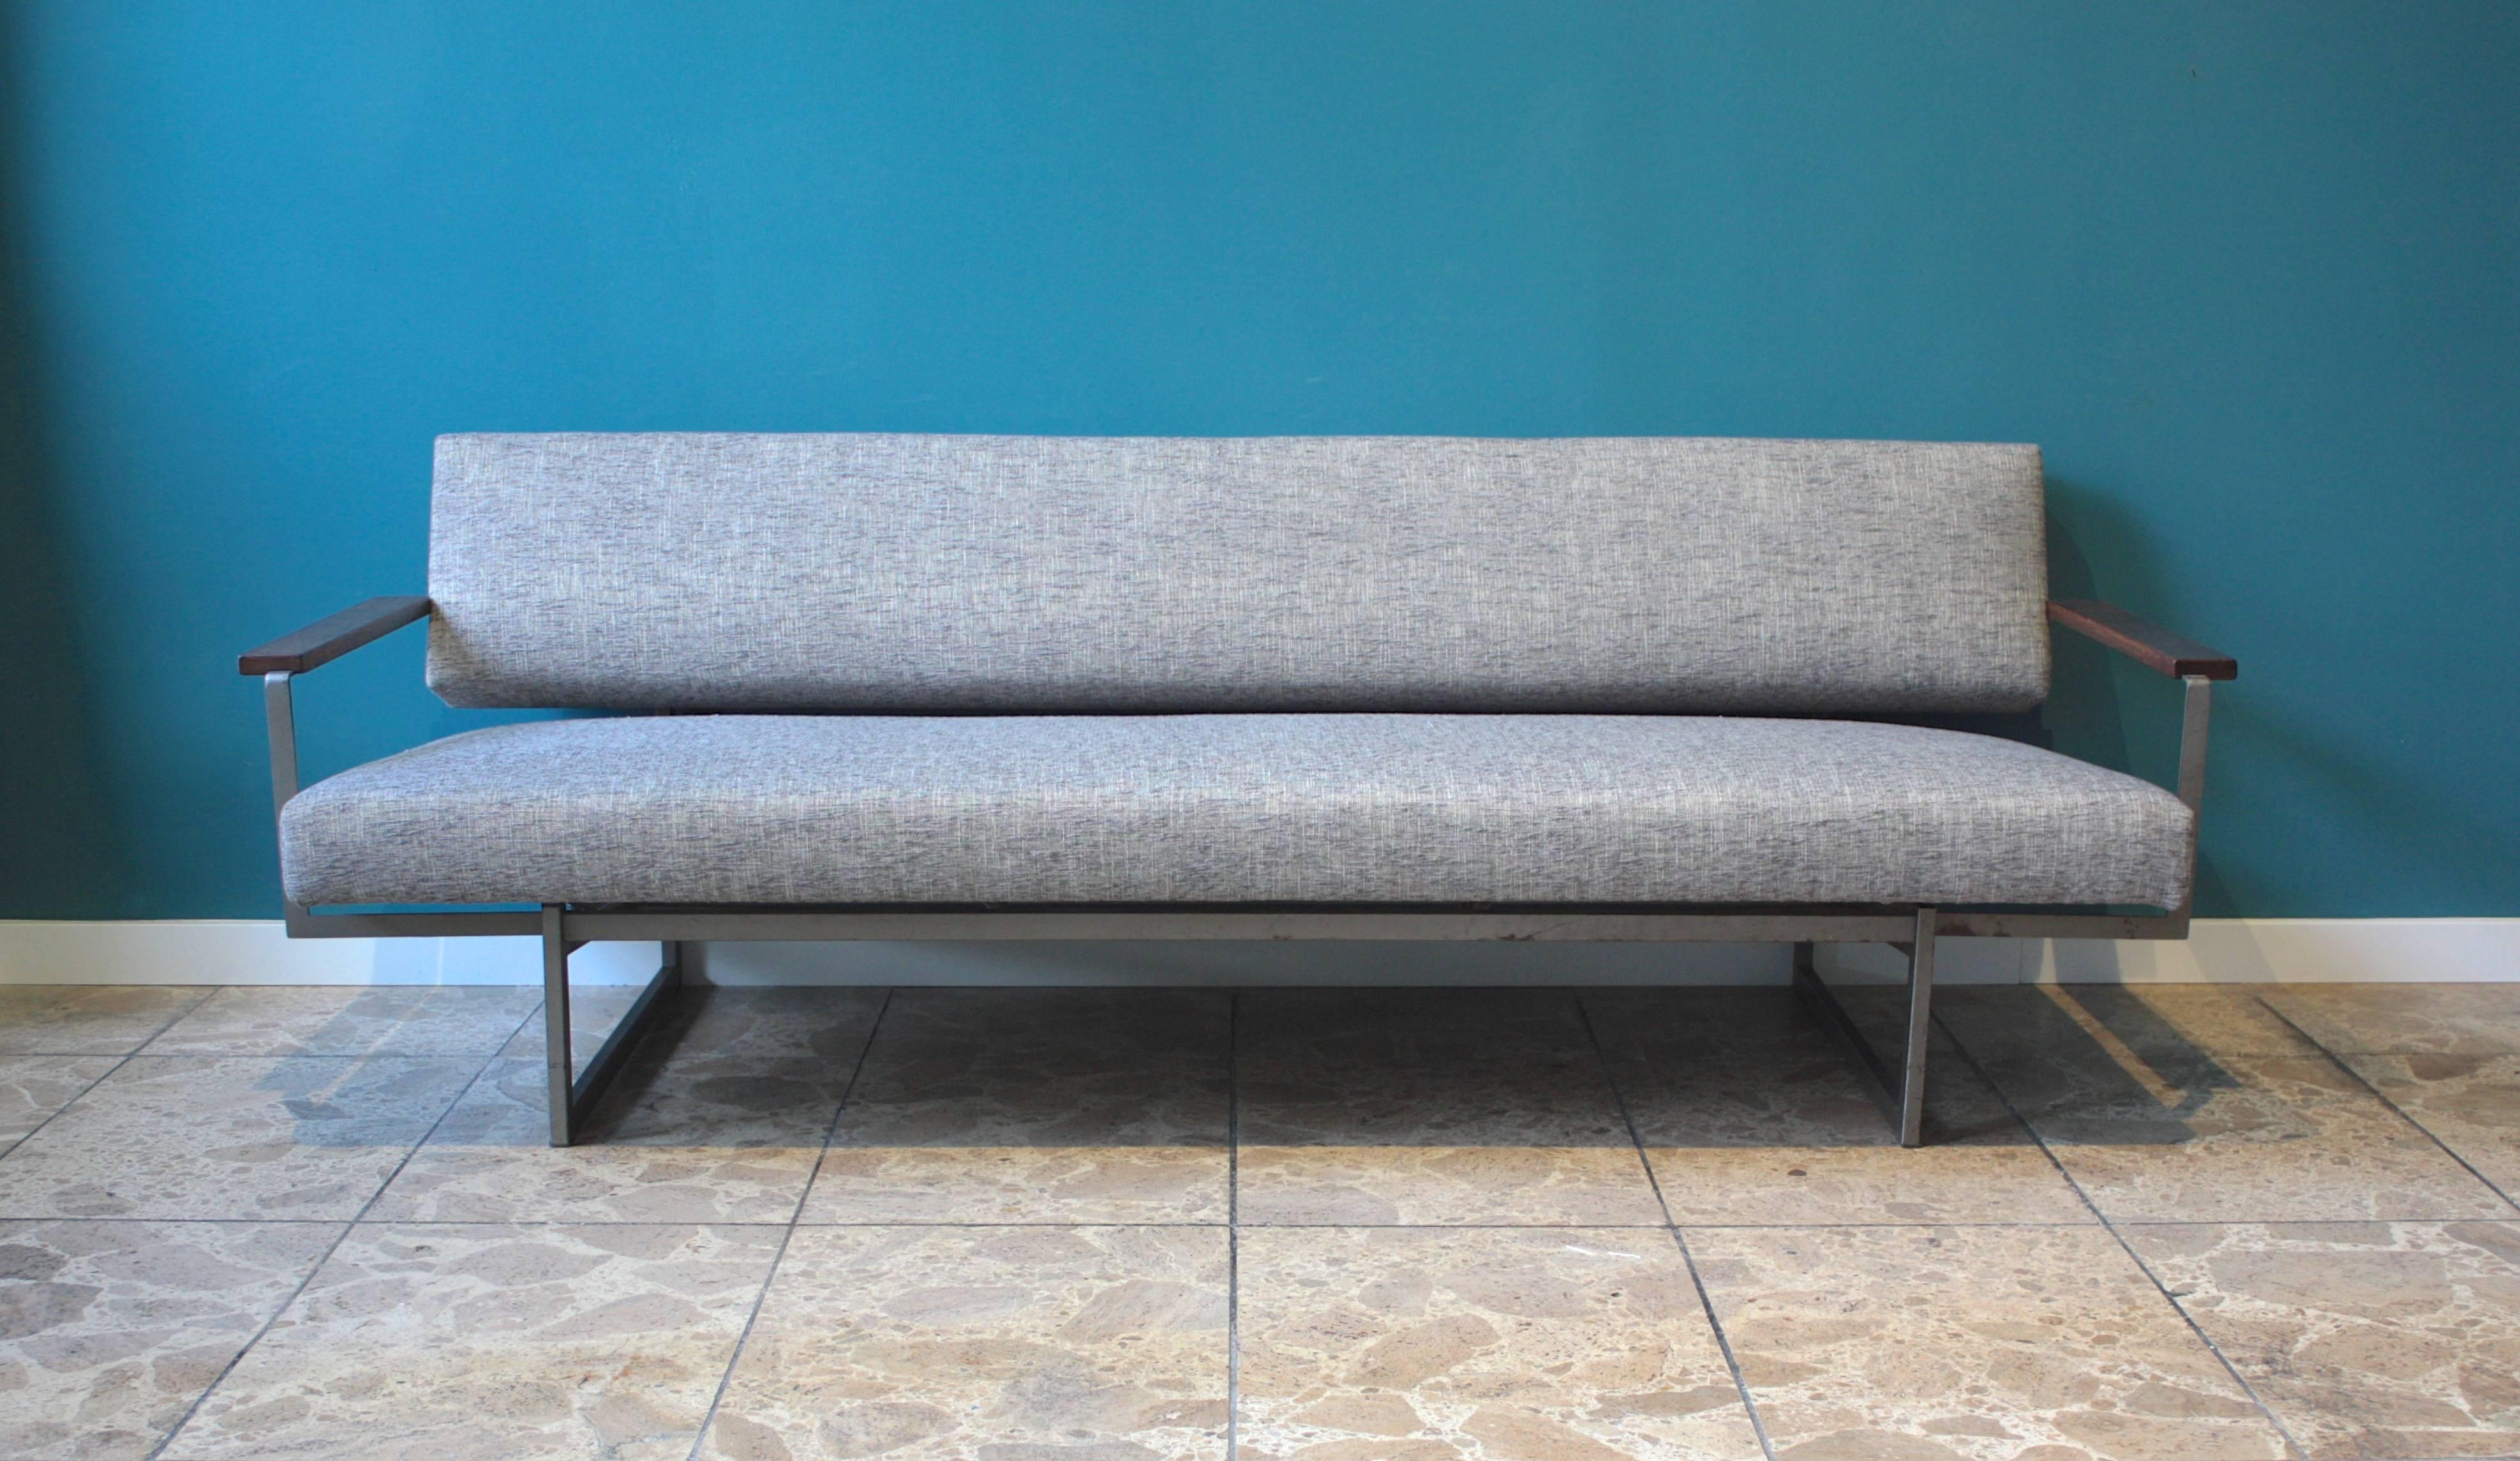 This sofa was designed by Rob Parry and produced by Gelderland in the Netherlands in the 1950s. It has a metal frame and wooden armrests made of wenge. It can be converted into a daybed (see photos). It has been entirely reupholstered.